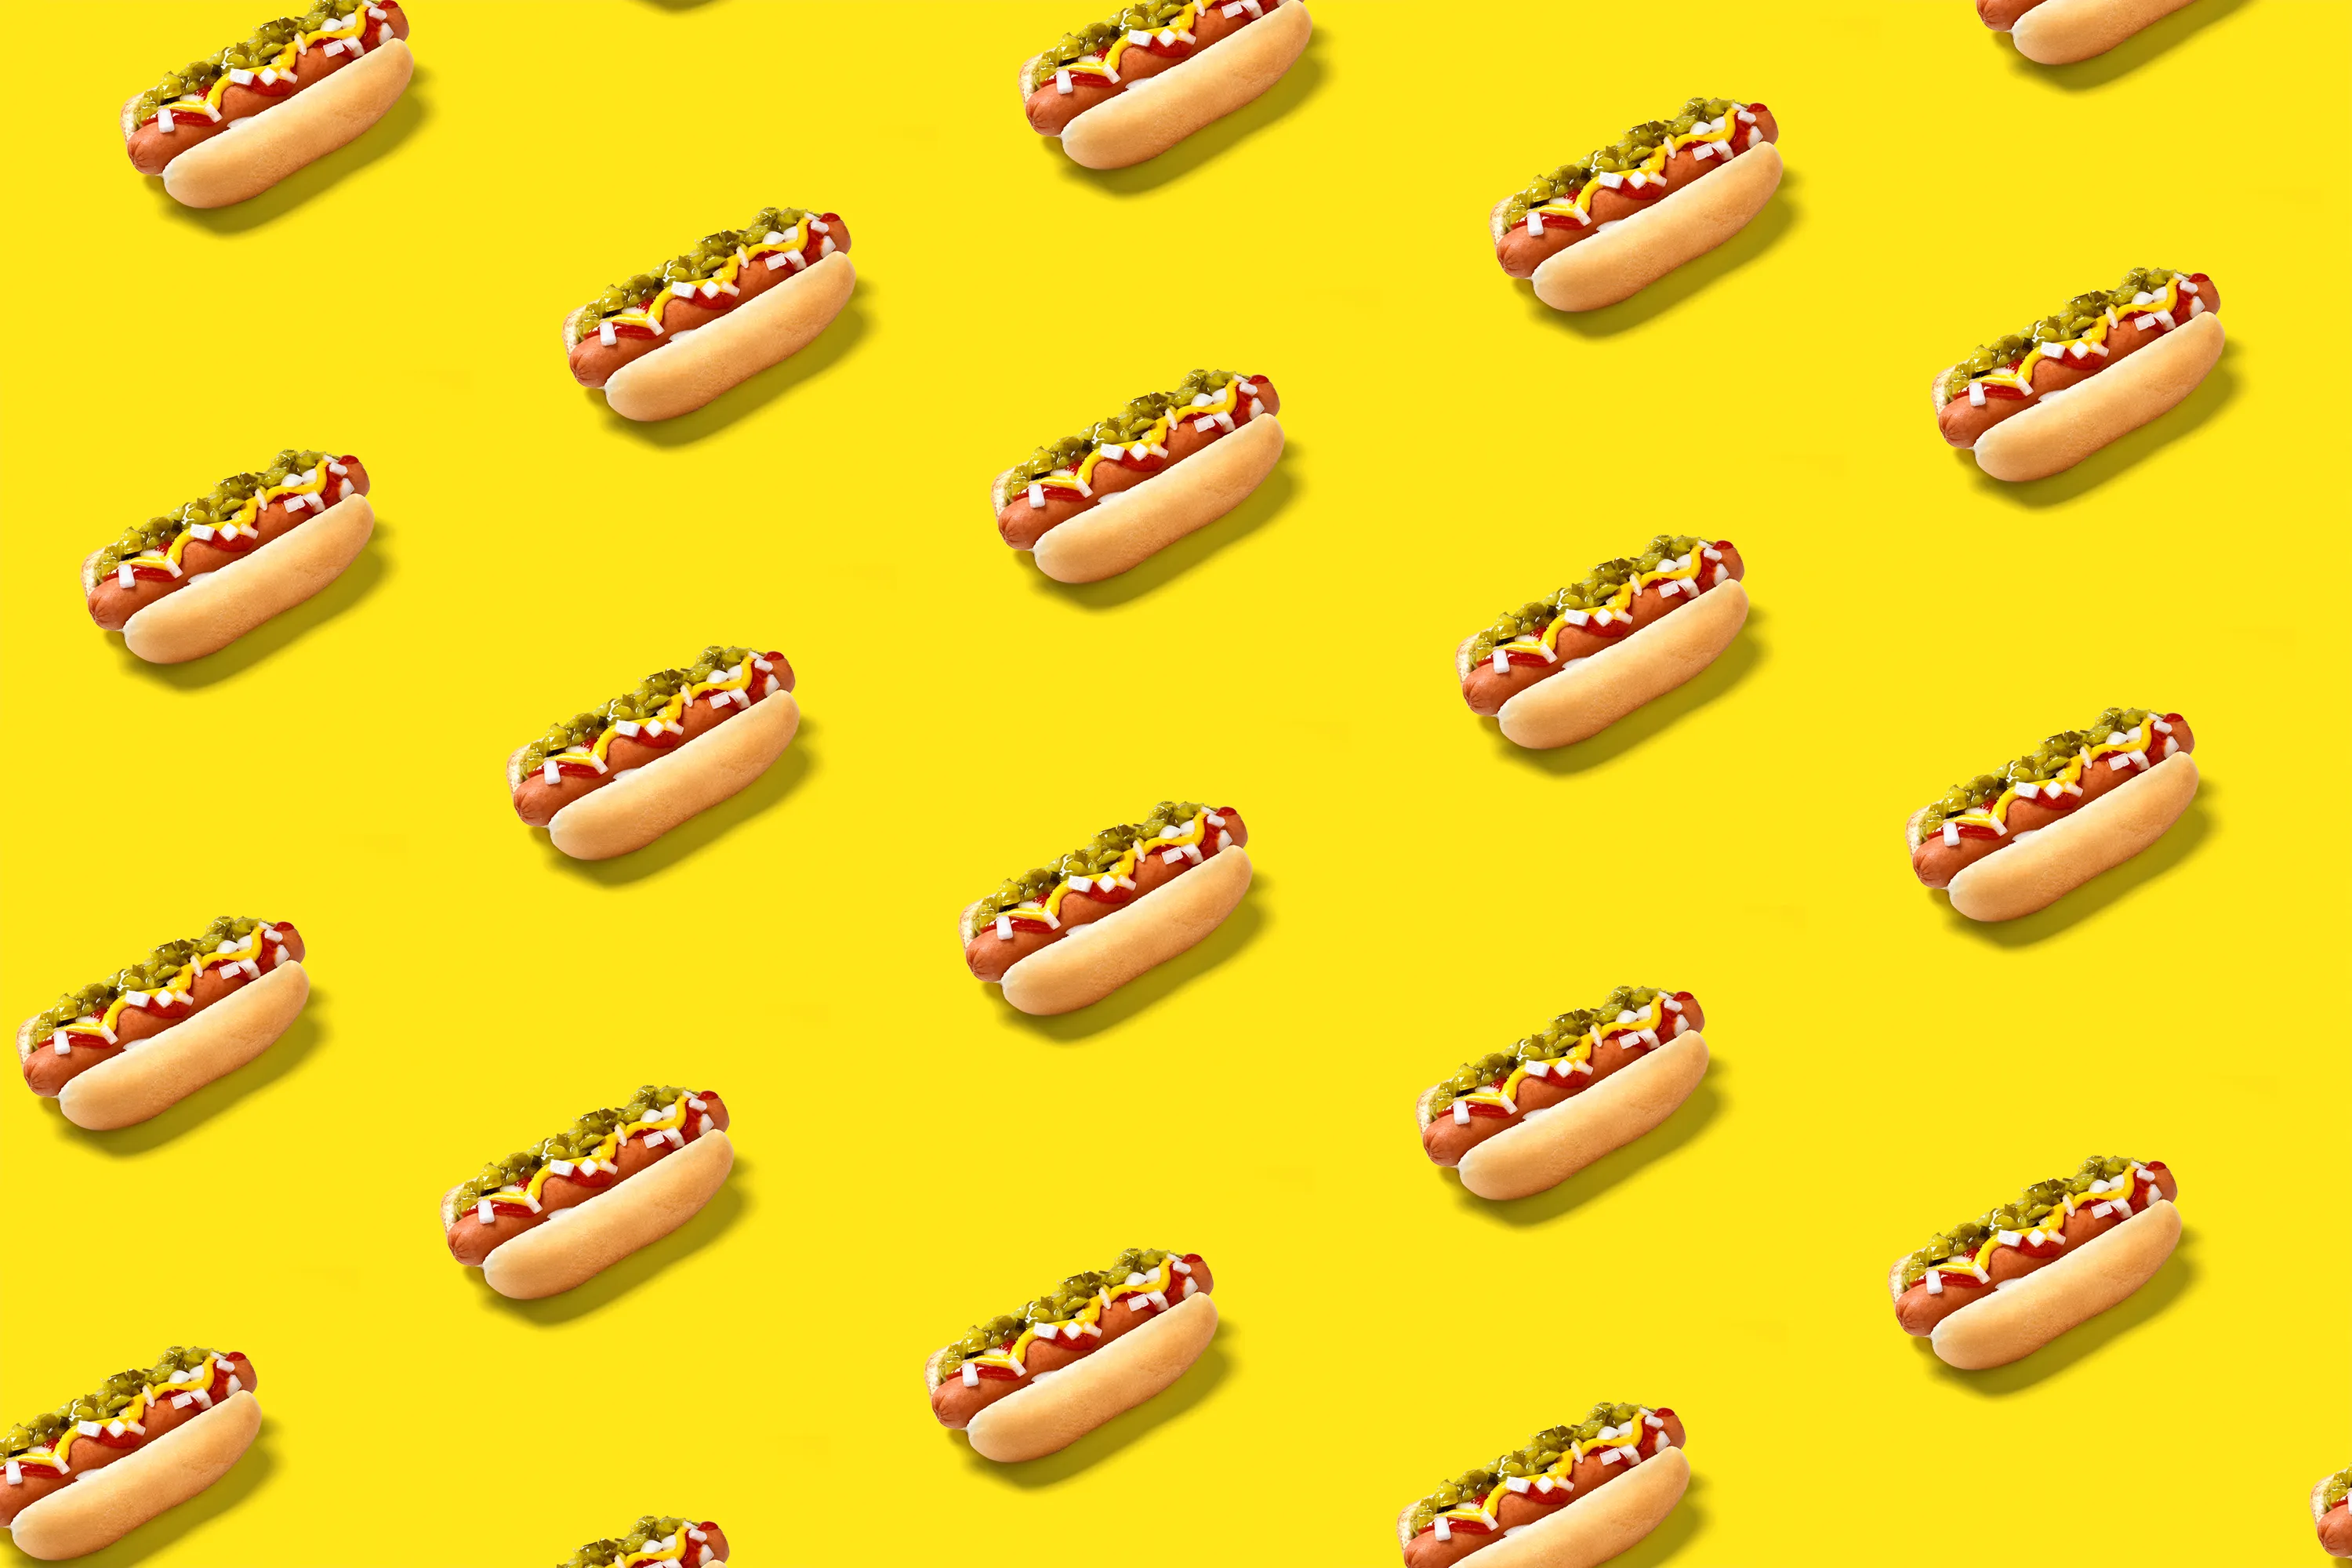 Fast Food Chains Wage Low-Price Hot Dog Wars